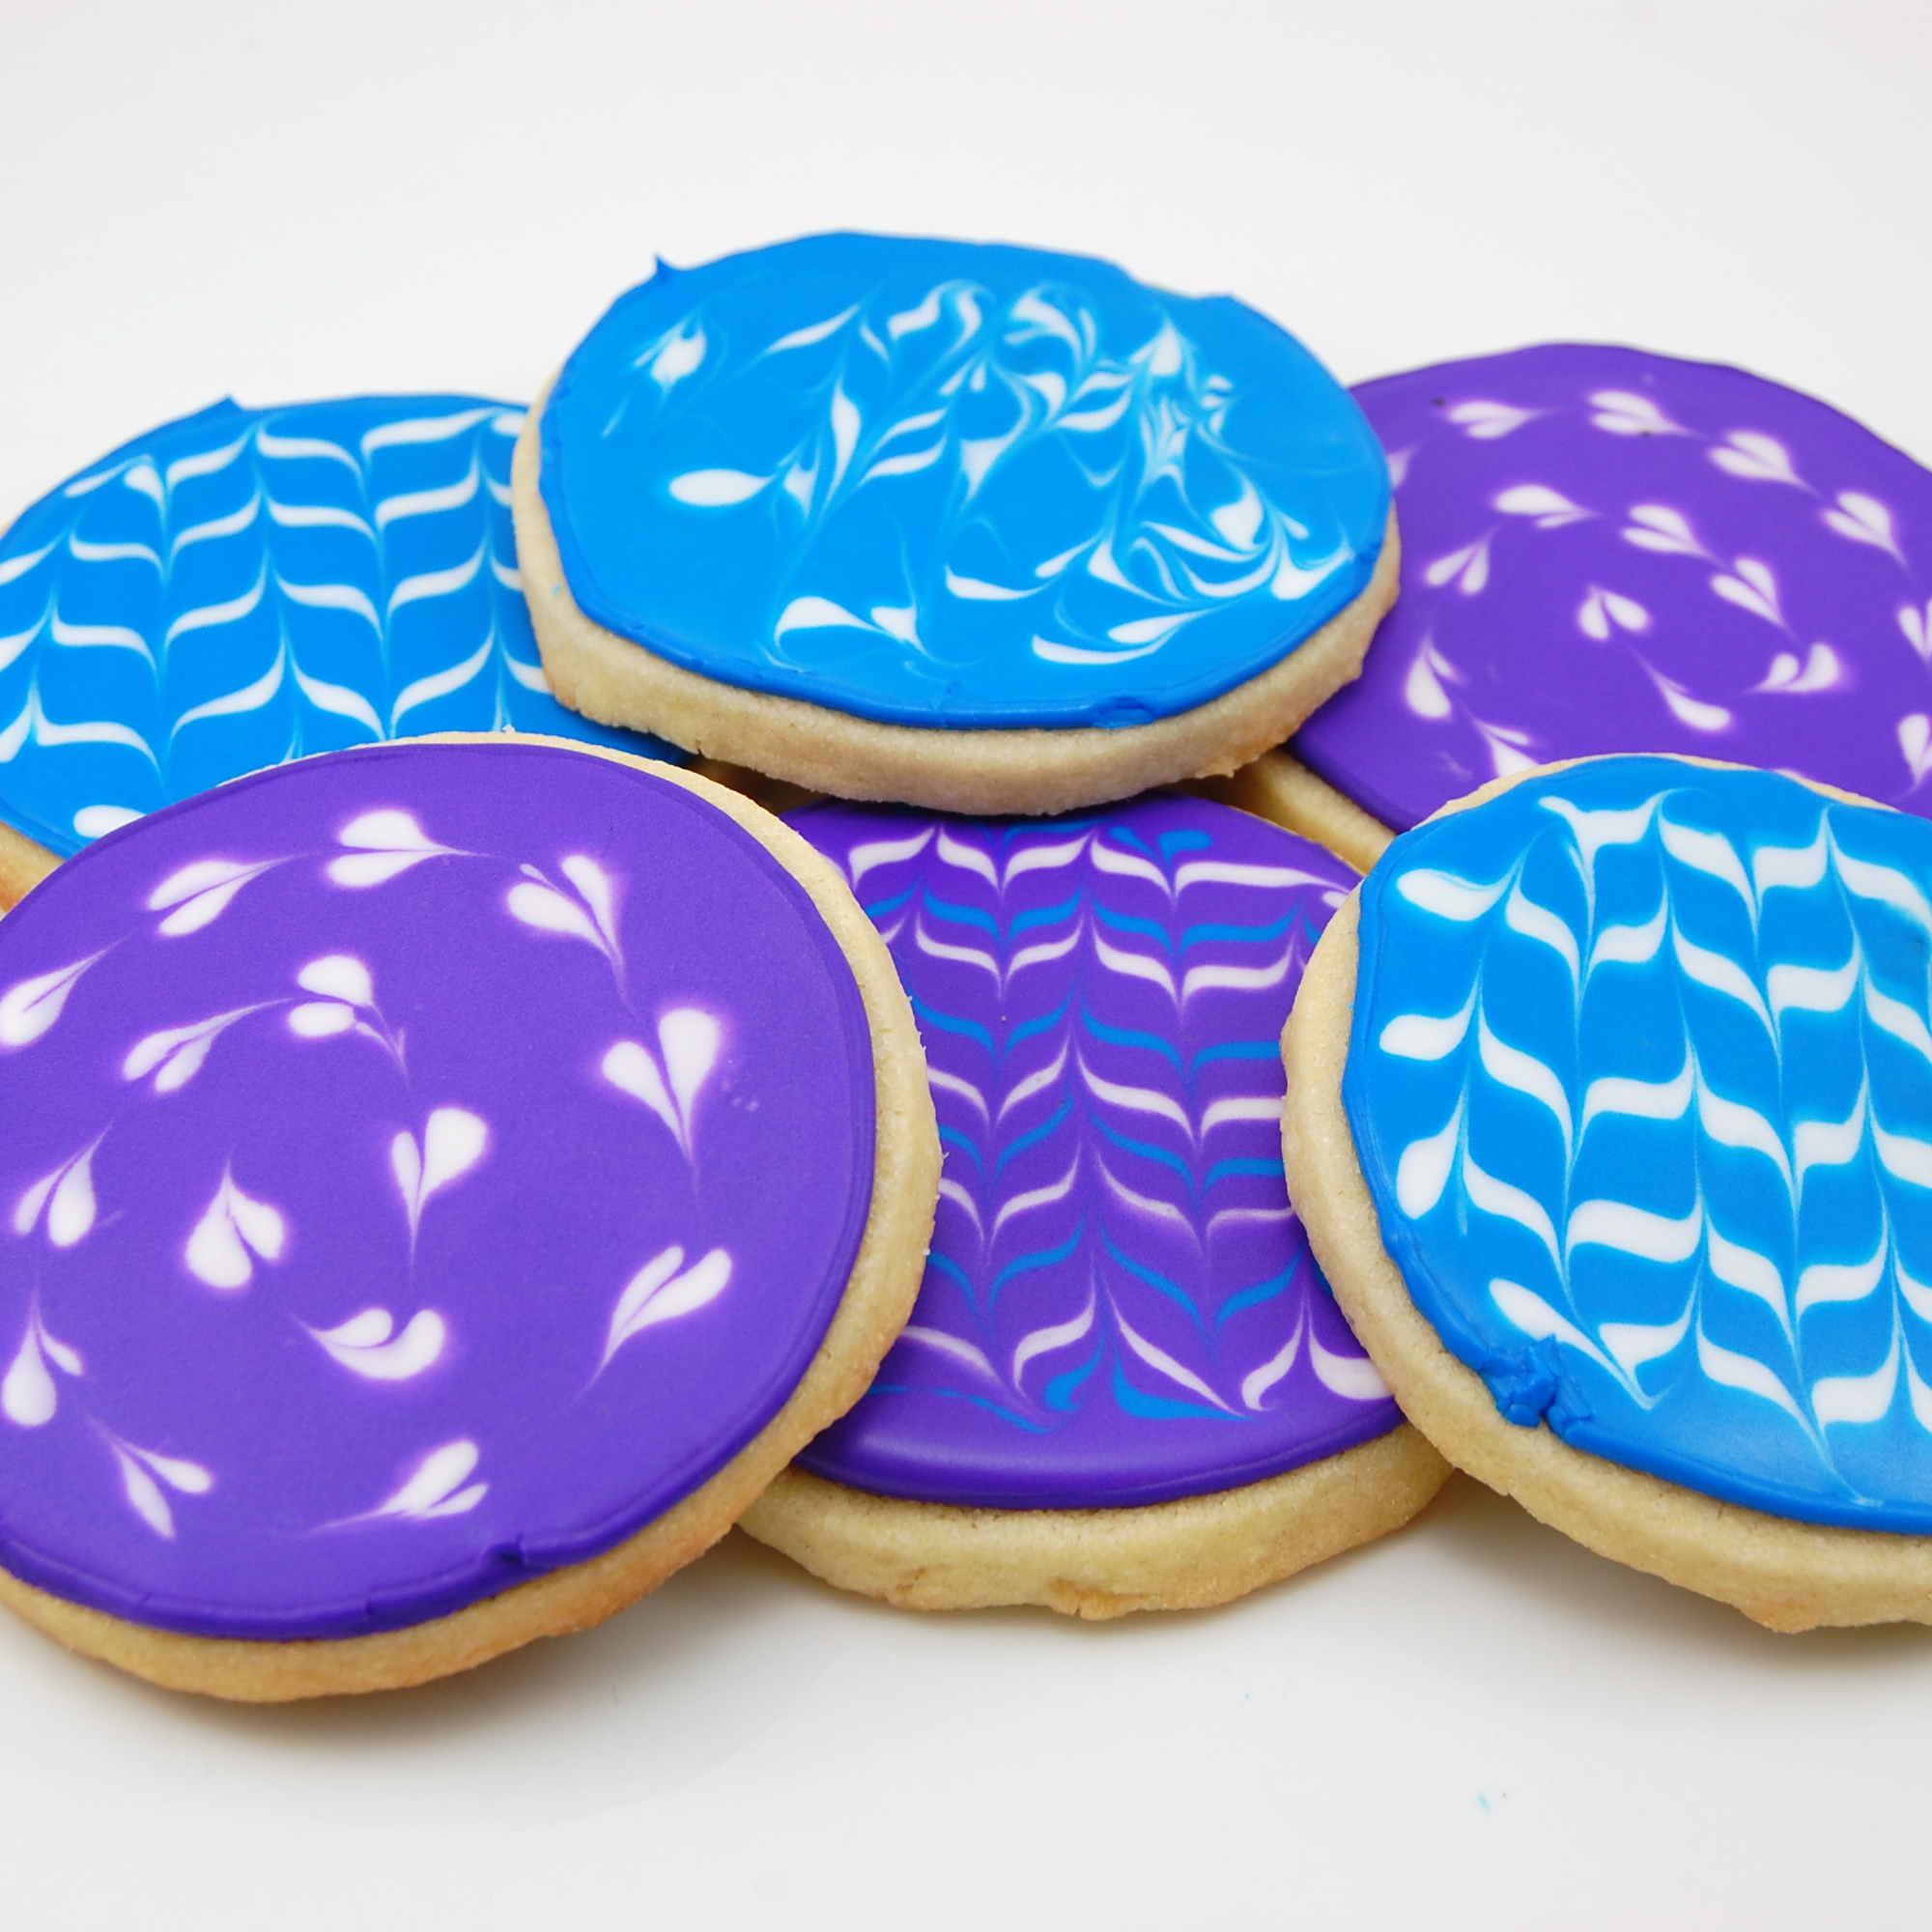 Easy Royal Icing Recipe For Cookies